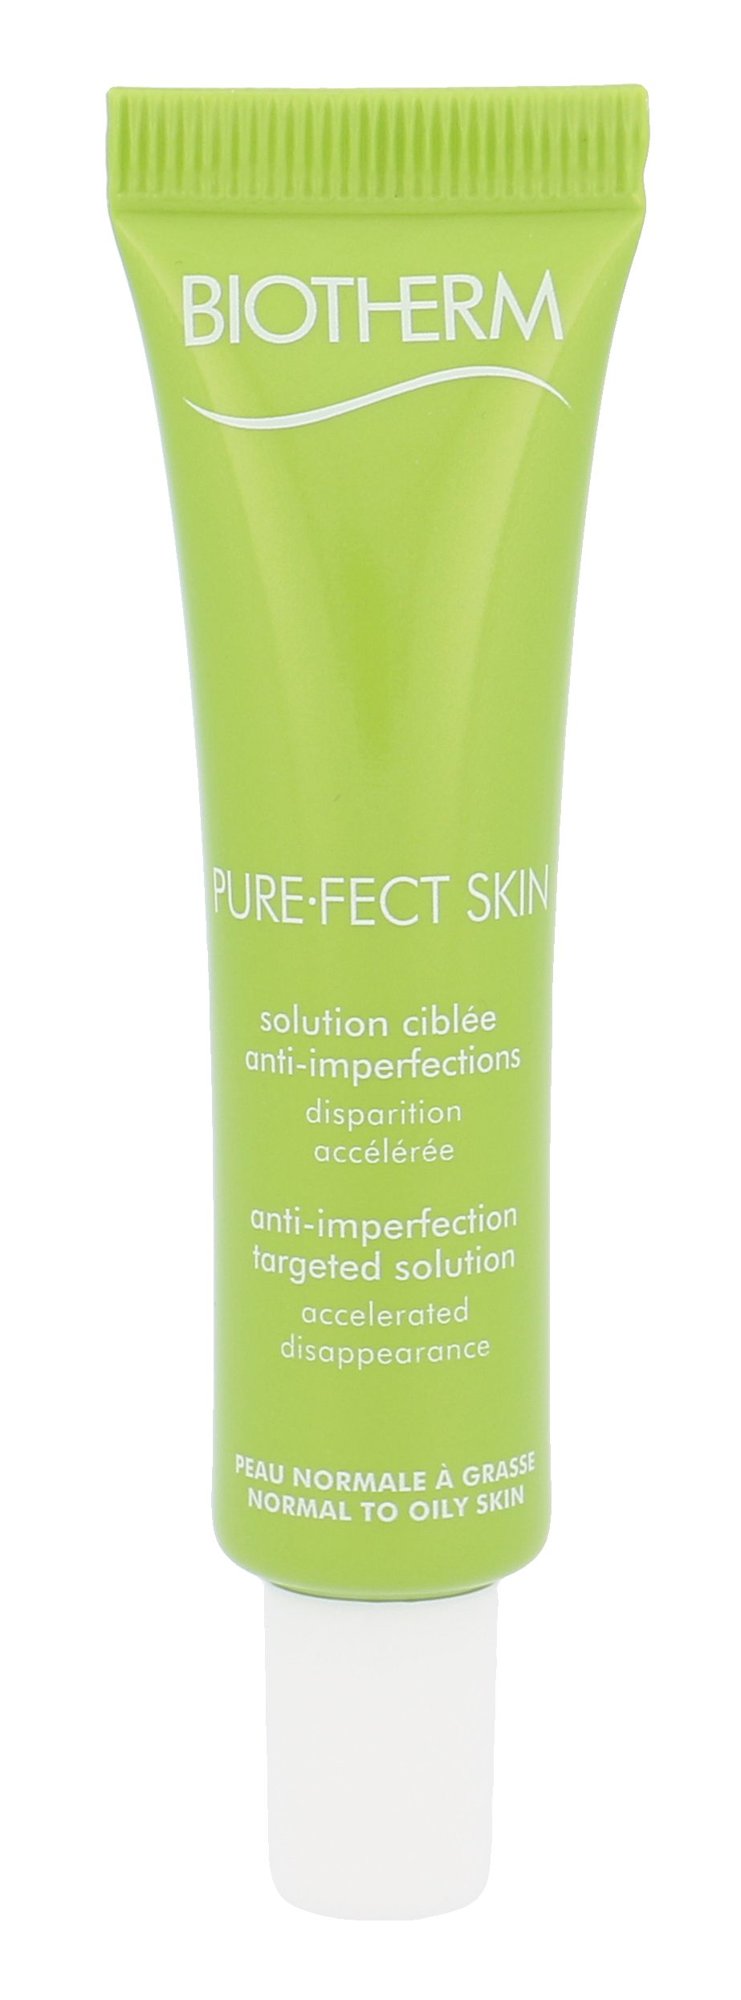 Biotherm PureFect Skin Targeted Solution